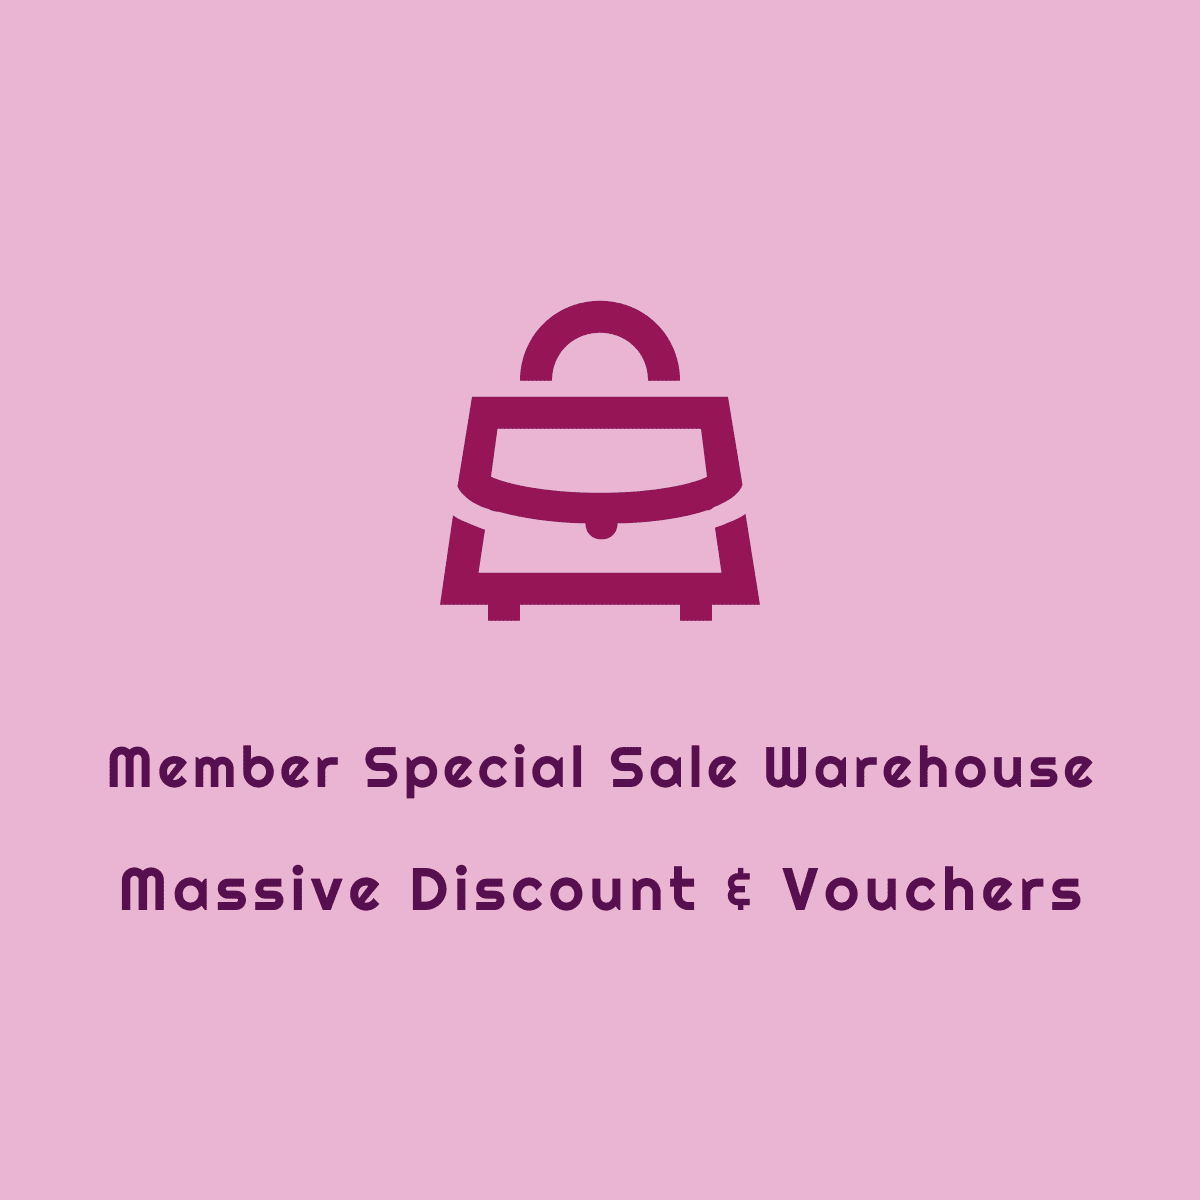 Member Special Sale Warehouse